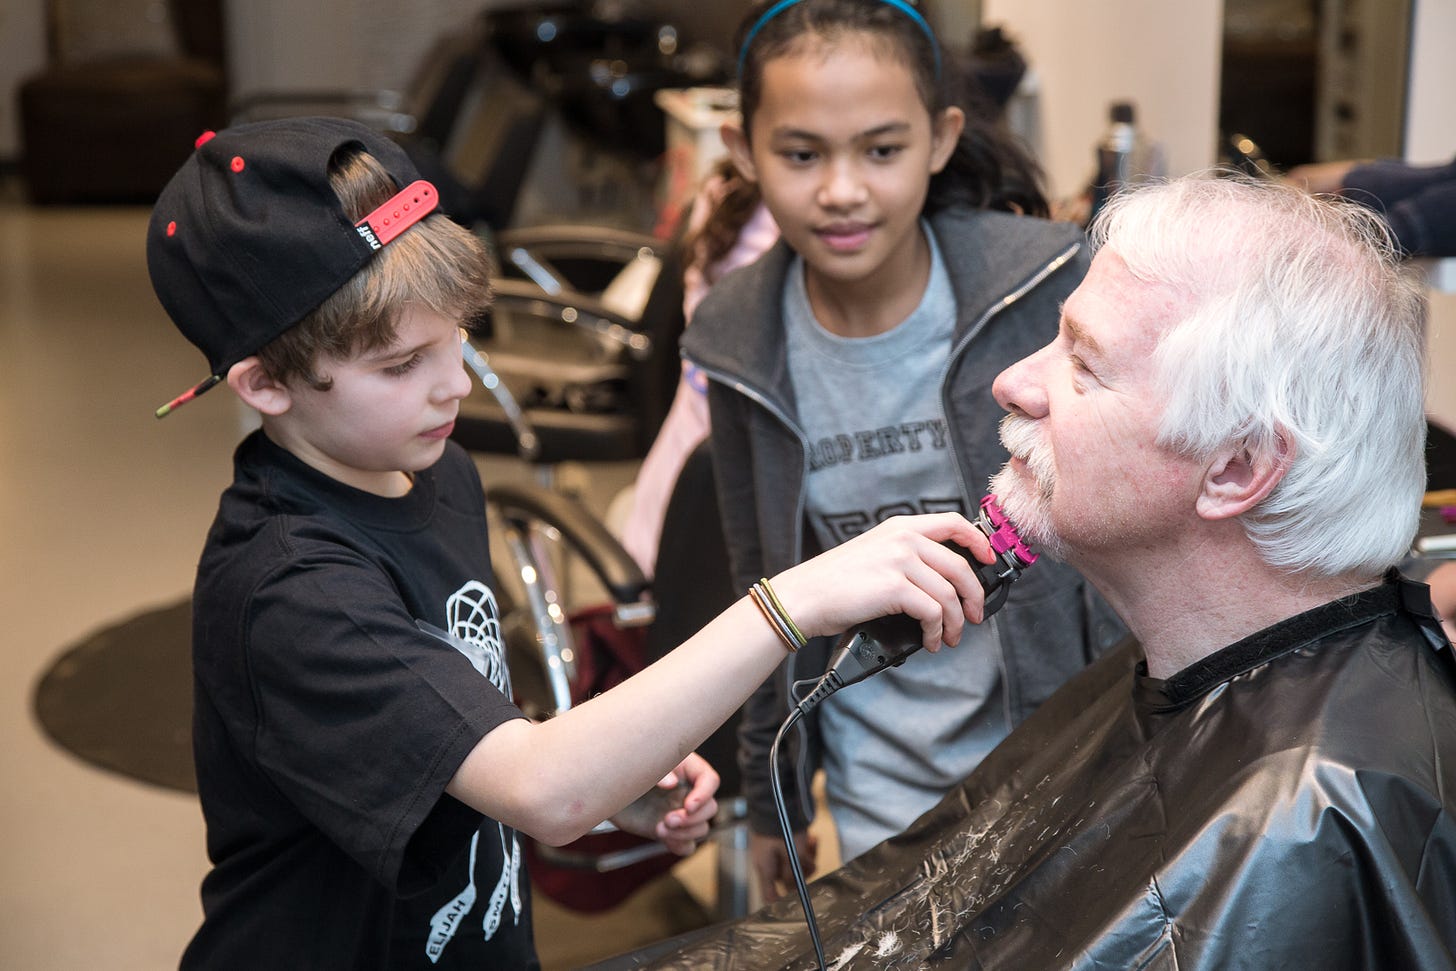 A middle-aged man sits in profile in a salon chair, and two children stand to his front and side, one a boy with electric clippers, gently trimming his silver beard.